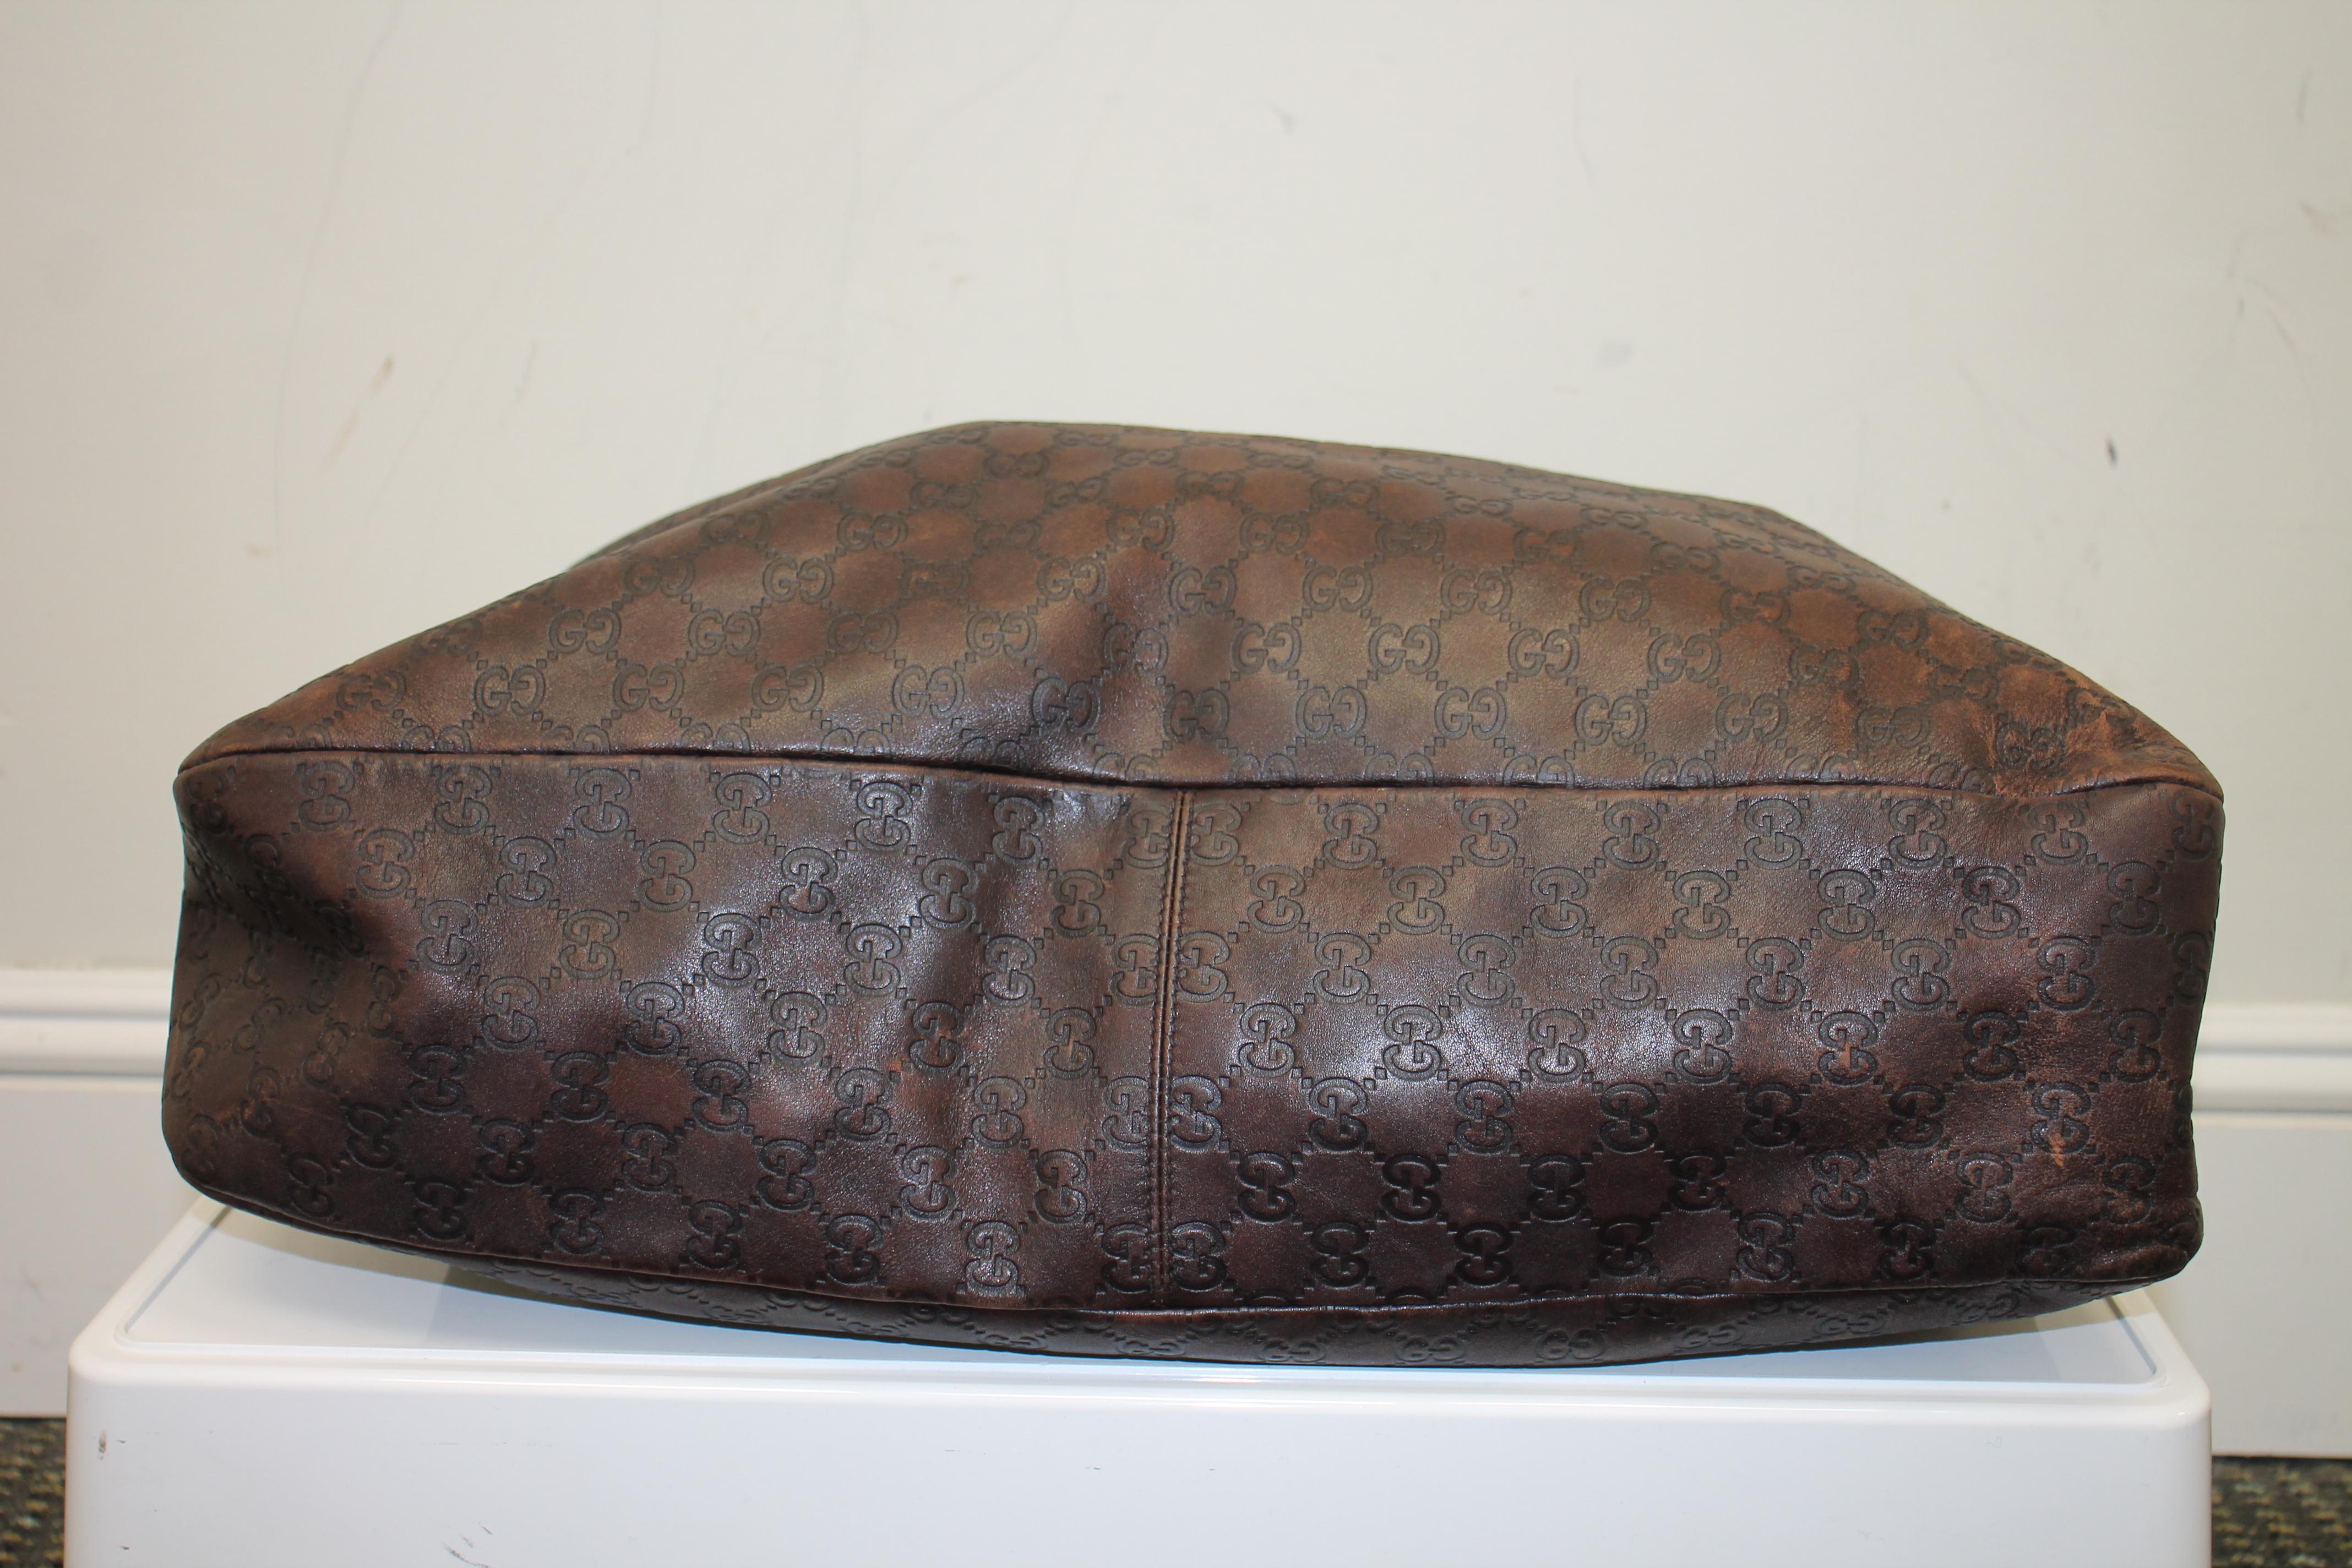 Gucci Oversized Leather Embossed Monogram Shoulder Bag In Good Condition For Sale In Roslyn, NY